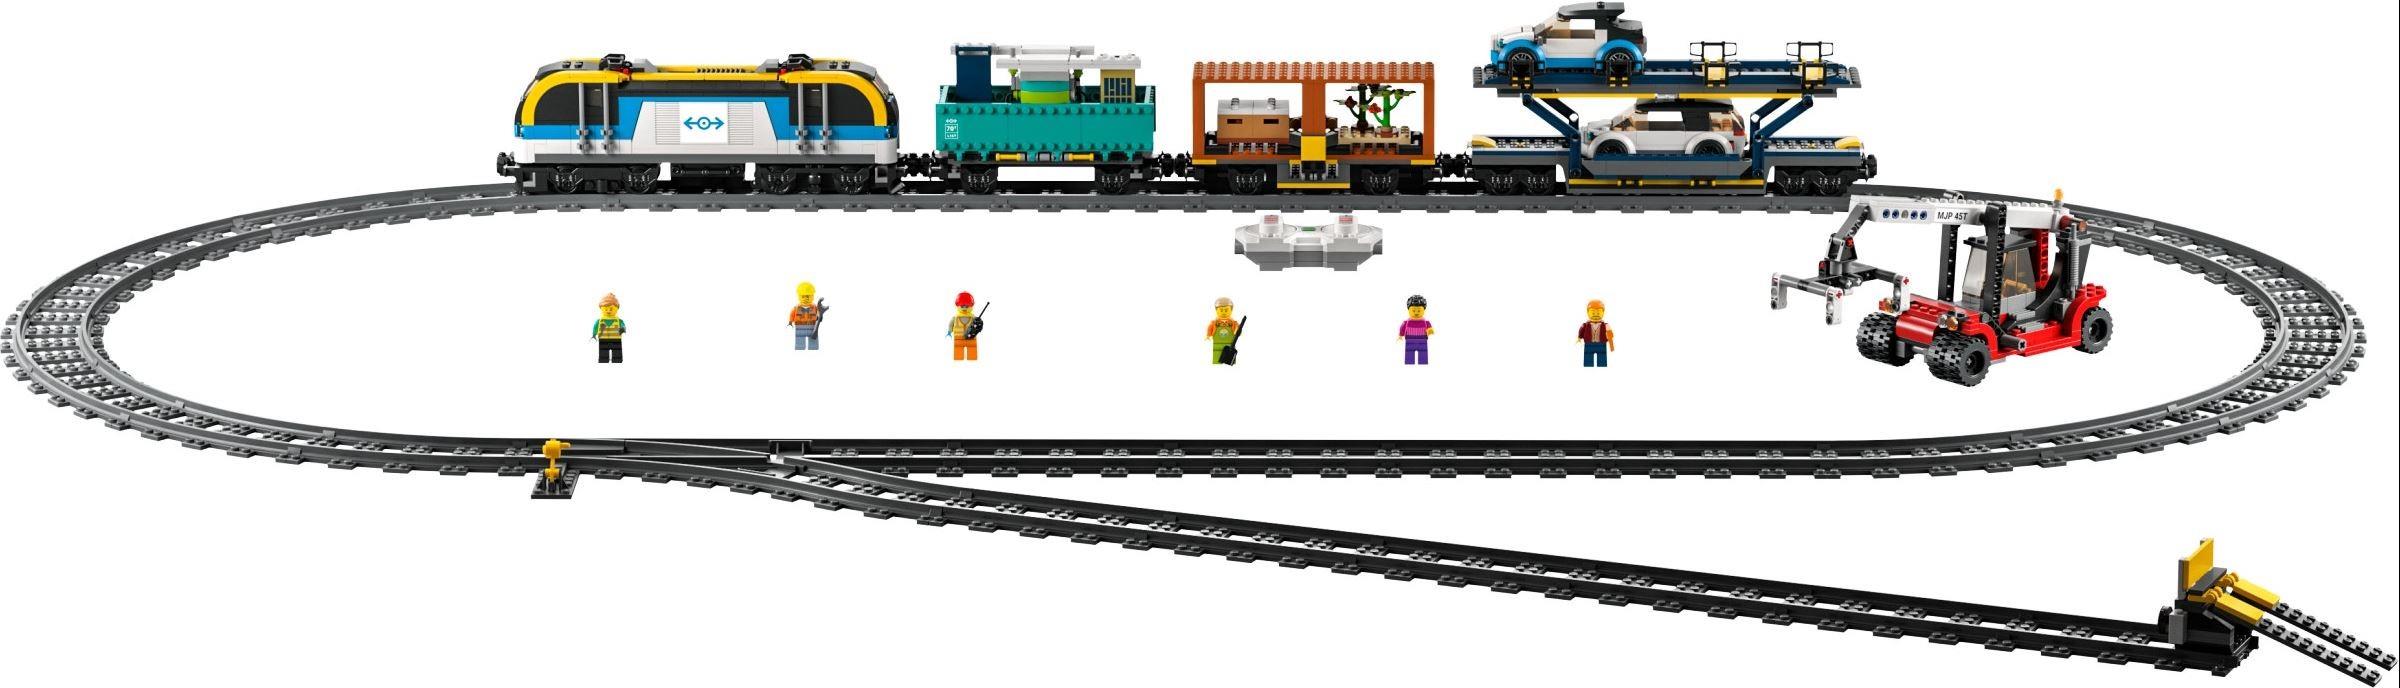 60336 Freight Train - LEGO City - Pickup Only - LEGO